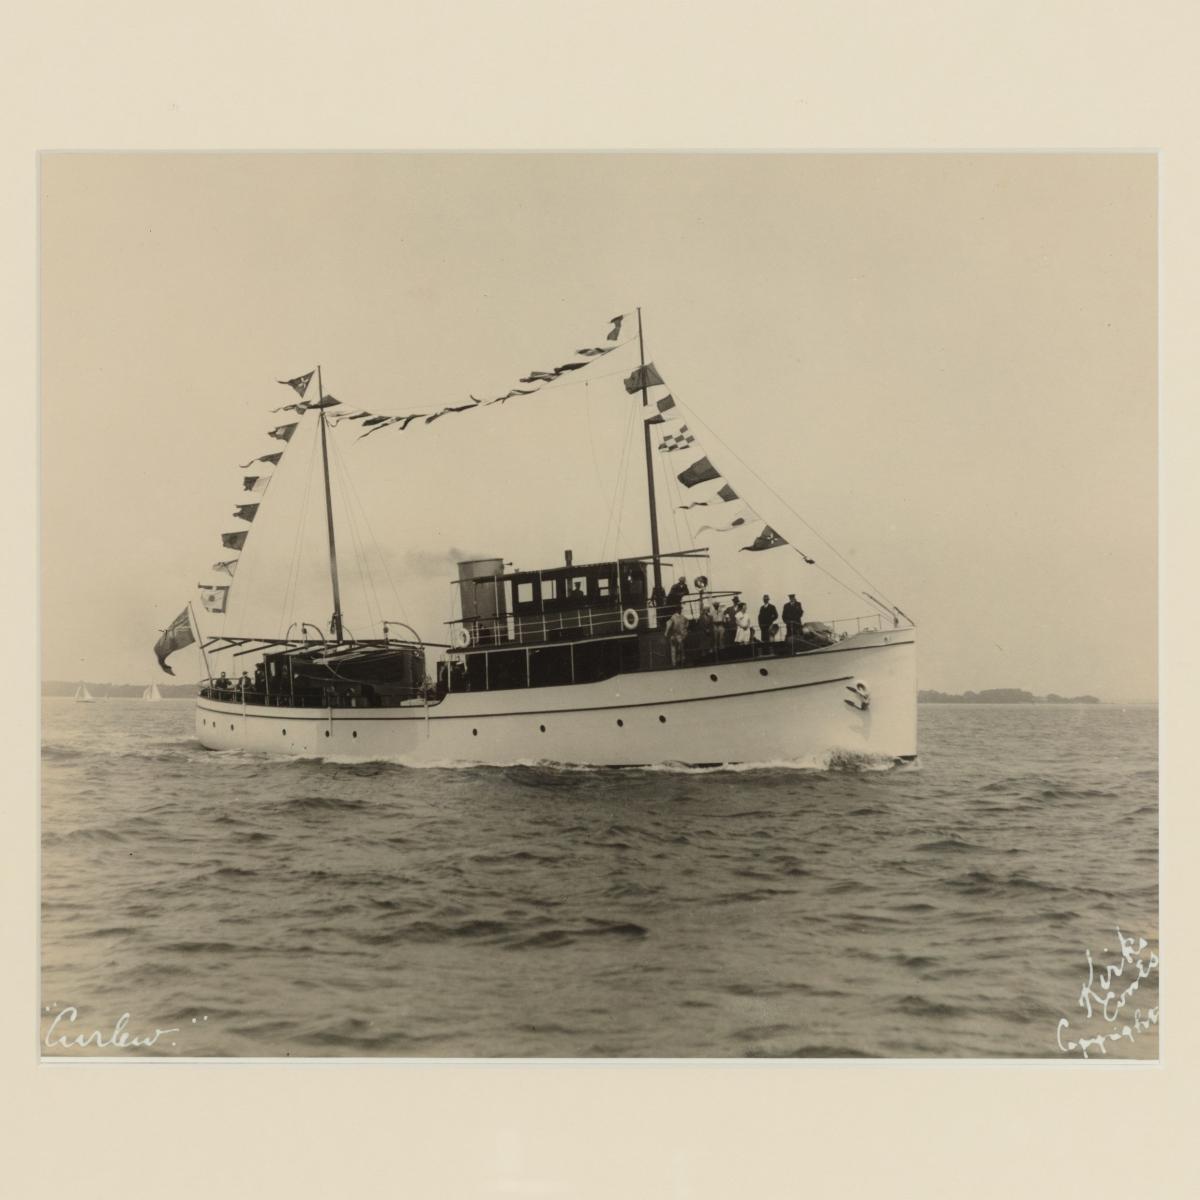 Early silver gelatin photographic print of the sailing yacht Curlew